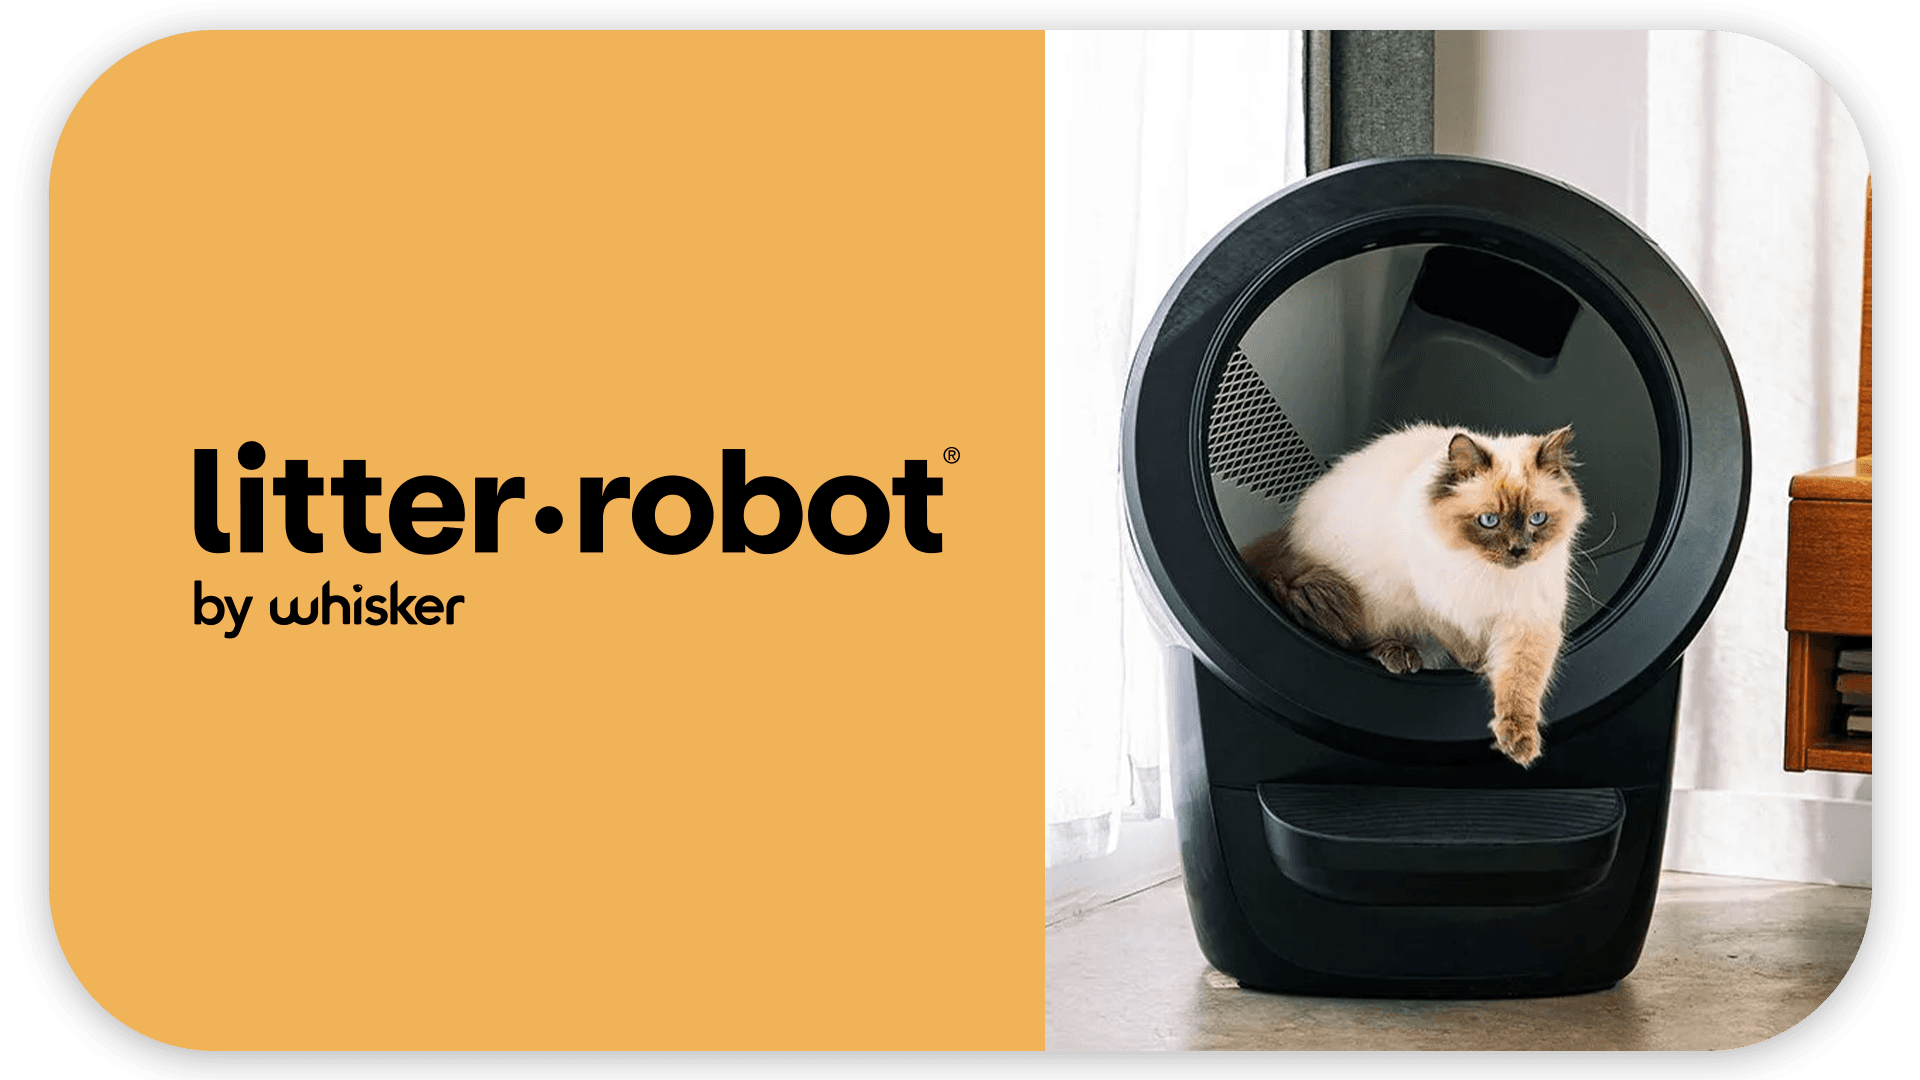 A cat steps out of a Litter-Robot next to a yellow background with "litter.robot by Whisker" text.